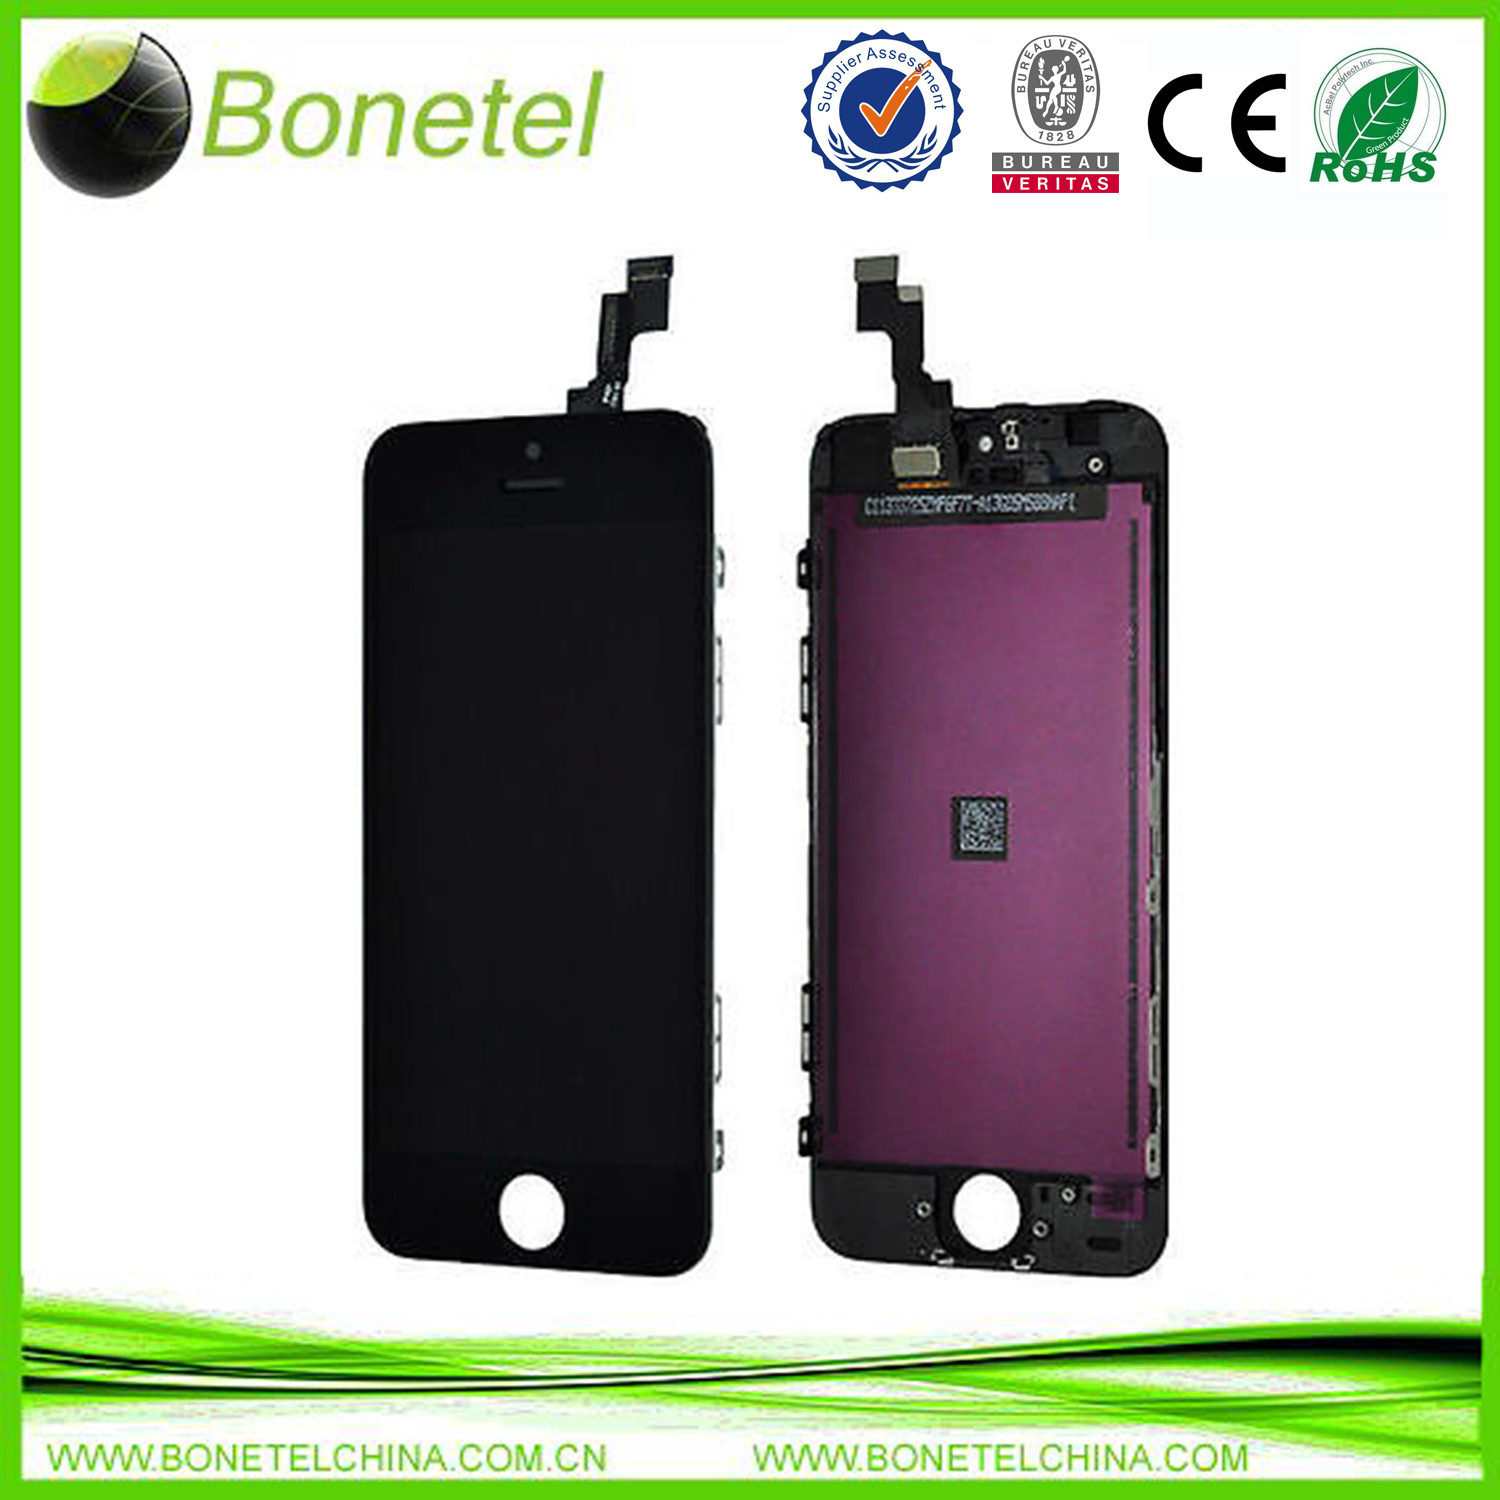 White/Black  LCD Display Touch Screen Digitizer Assembly for iPhone 5S 5GS